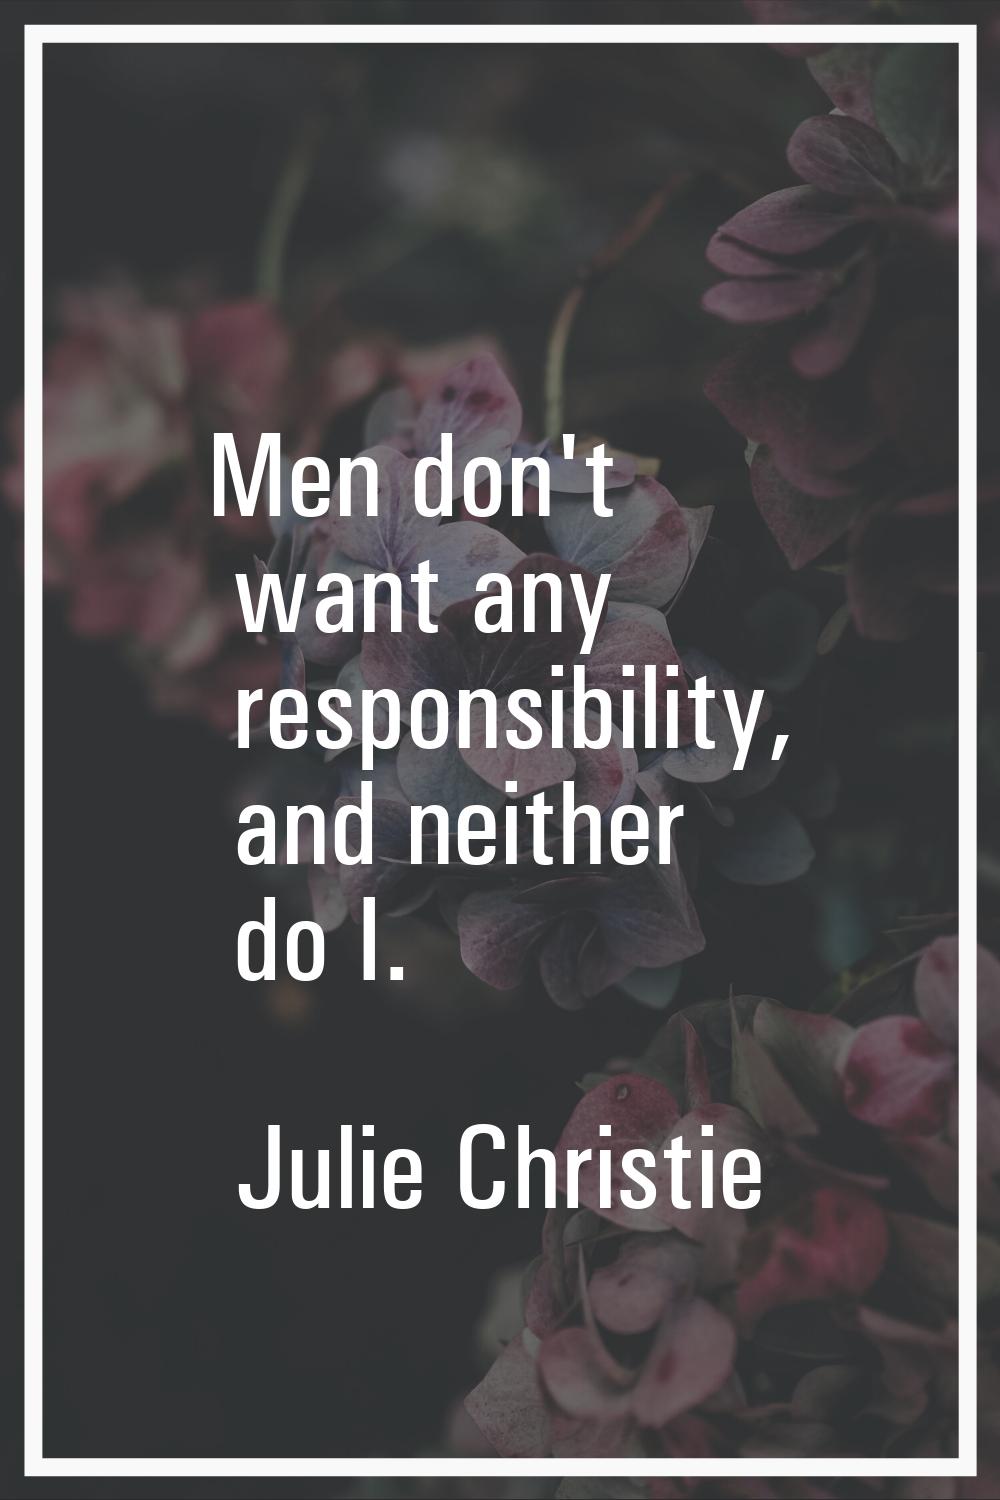 Men don't want any responsibility, and neither do I.